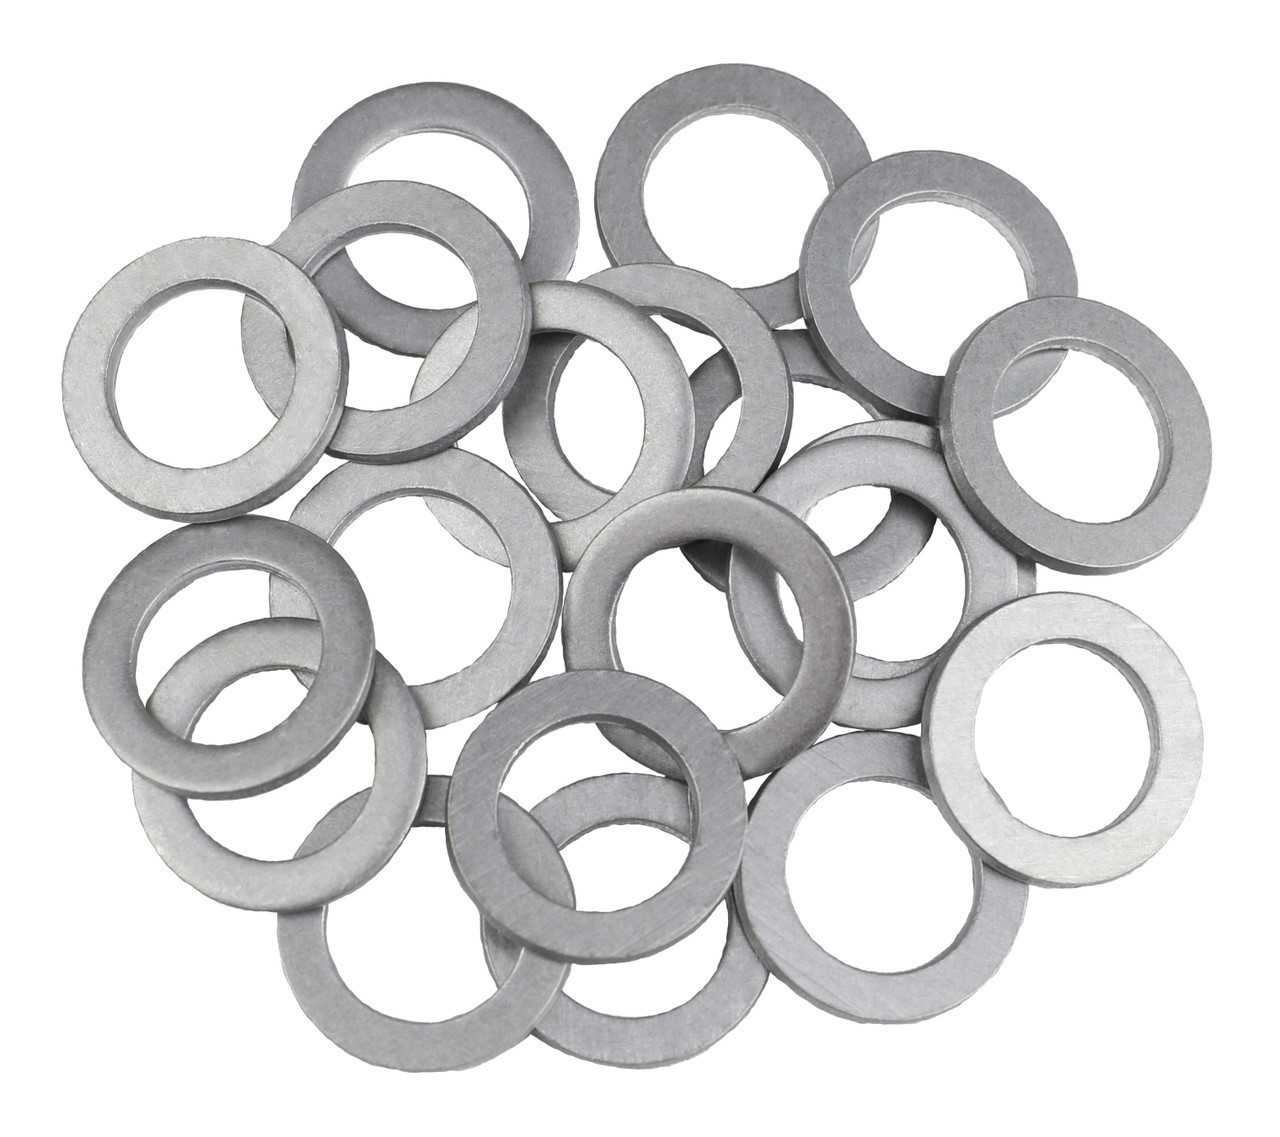 Jeep Wrangler Aluminum Oil Crush Washers/Drain Plug Seal Ring Gasket Kit - 2020-2023 - 3.0 Liter - 6 Cylinder - MADE IN USA